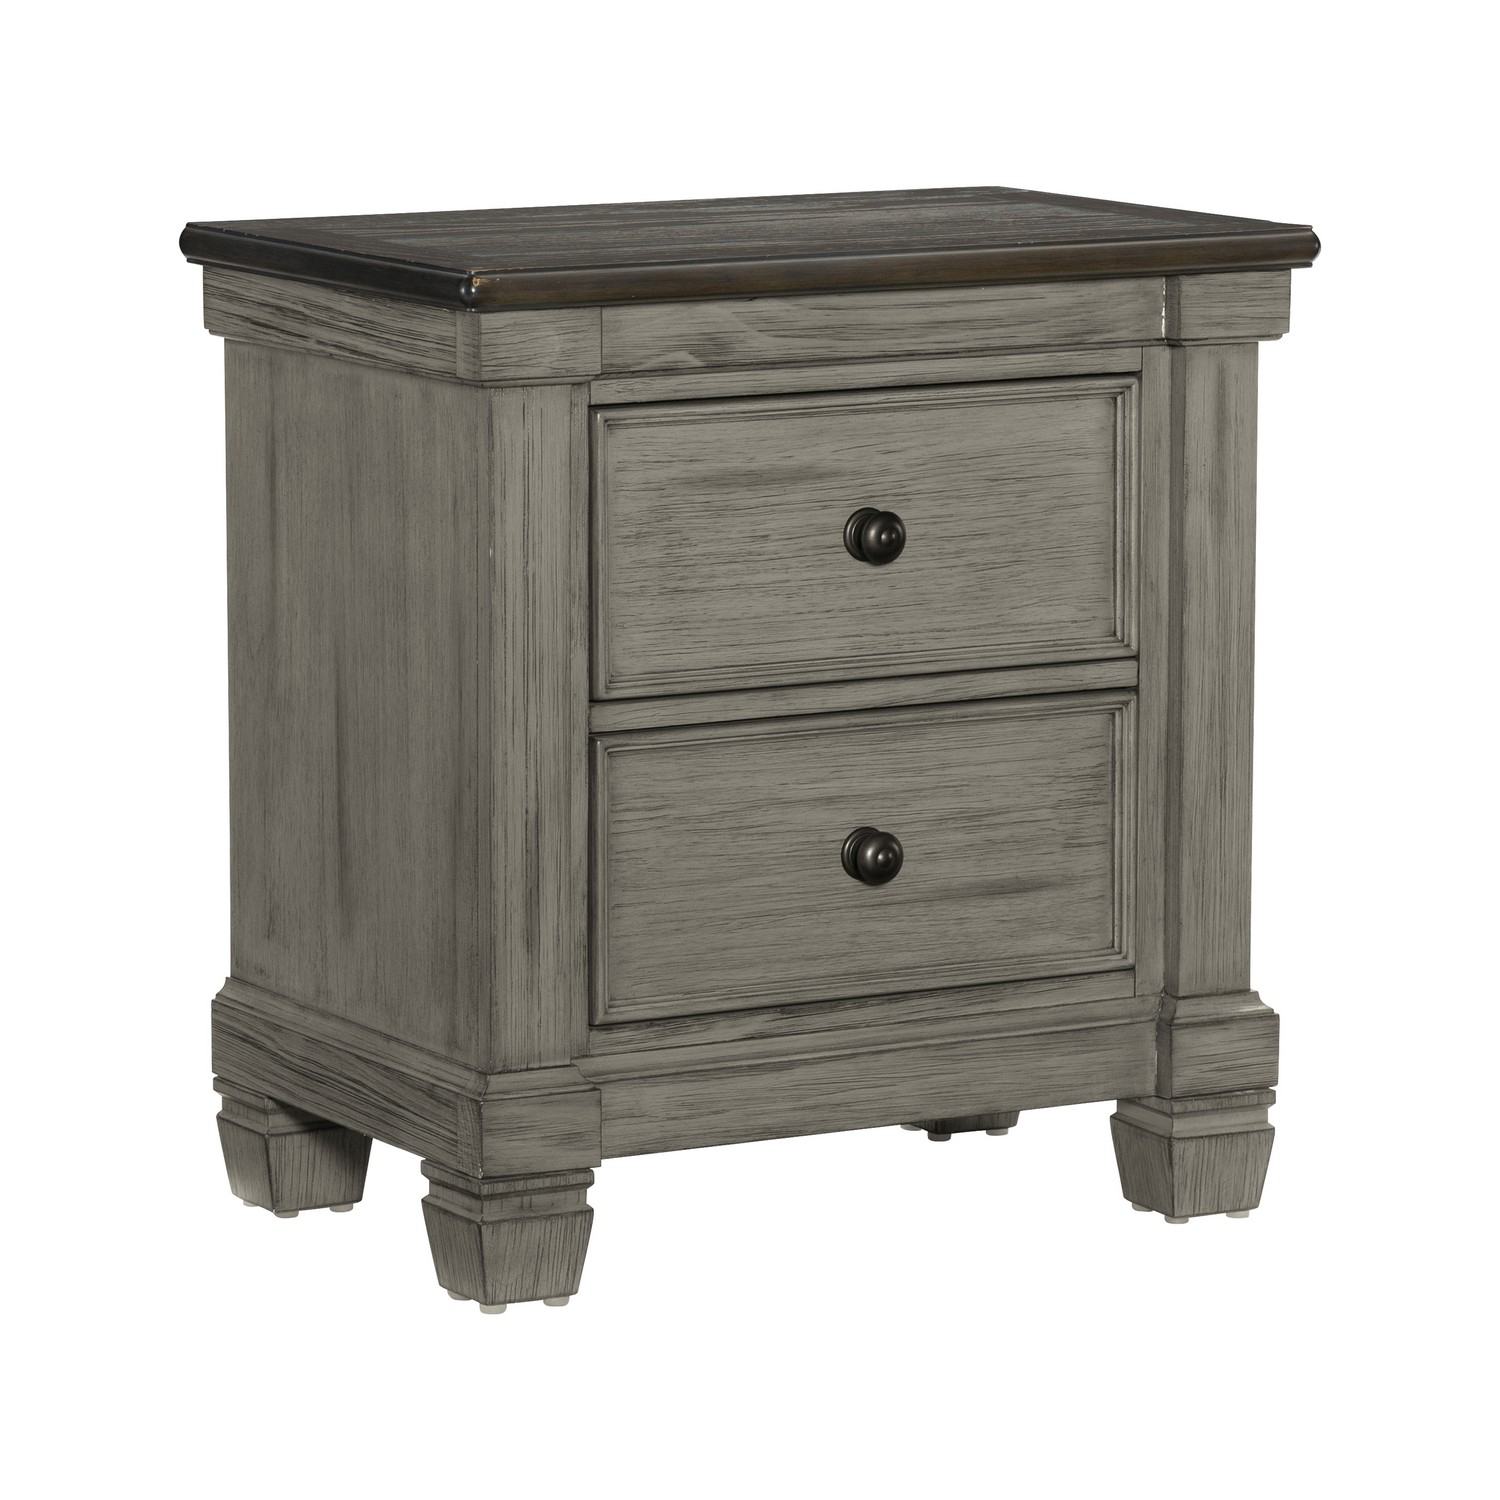 Homelegance Weaver Night Stand - Two-tone : Antique Gray And Coffee